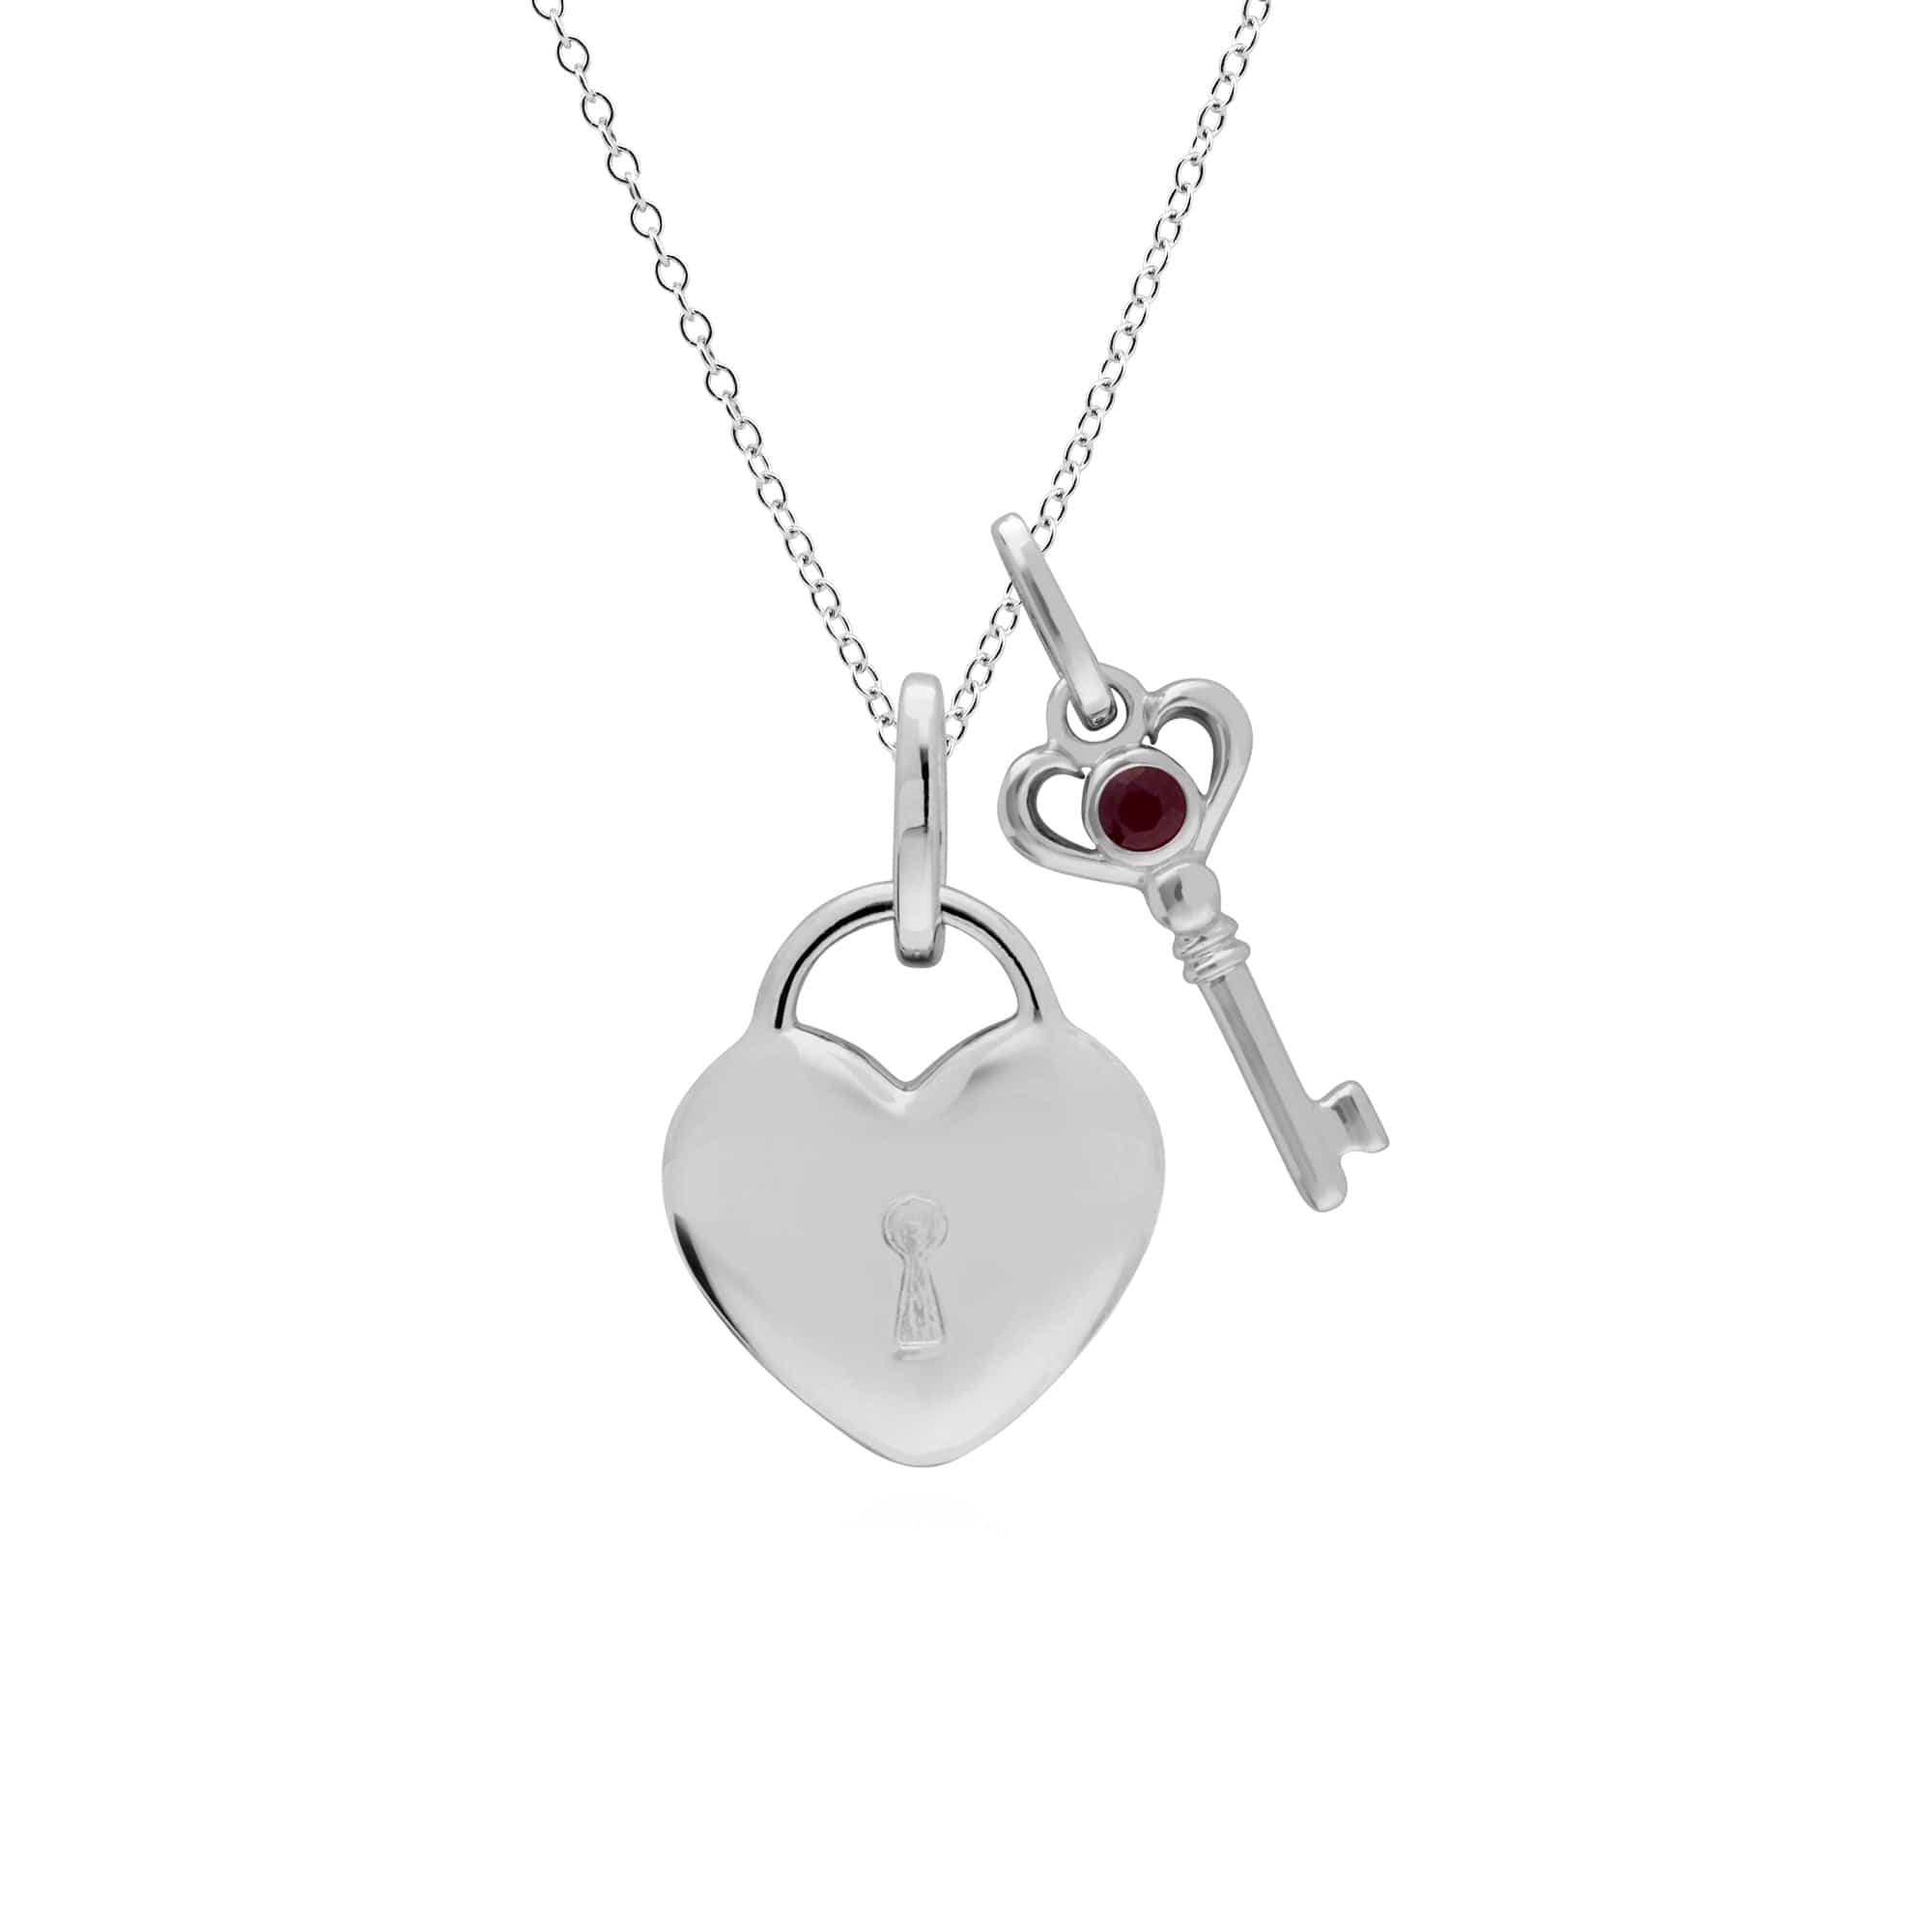 270P026402925-270P027001925 Classic Heart Lock Pendant & Ruby Key Charm in 925 Sterling Silver 1